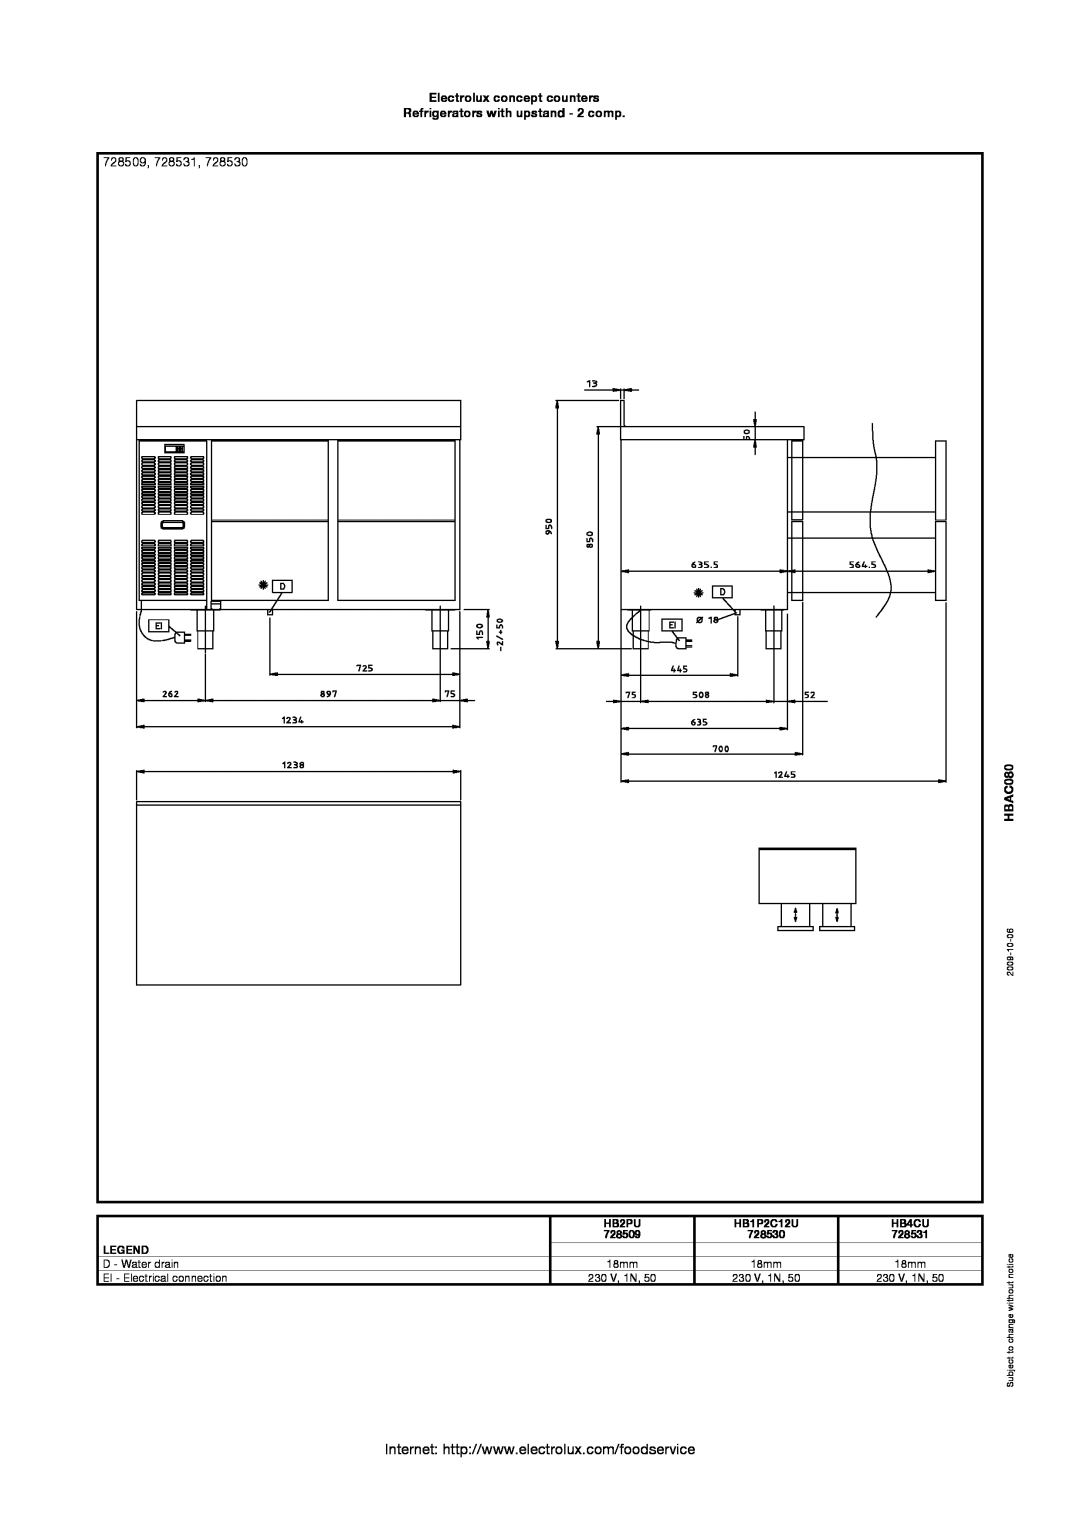 Electrolux HB1P2C12U manual 728509, 728531, Electrolux concept counters Refrigerators with upstand - 2 comp, HBAC080, HB2PU 